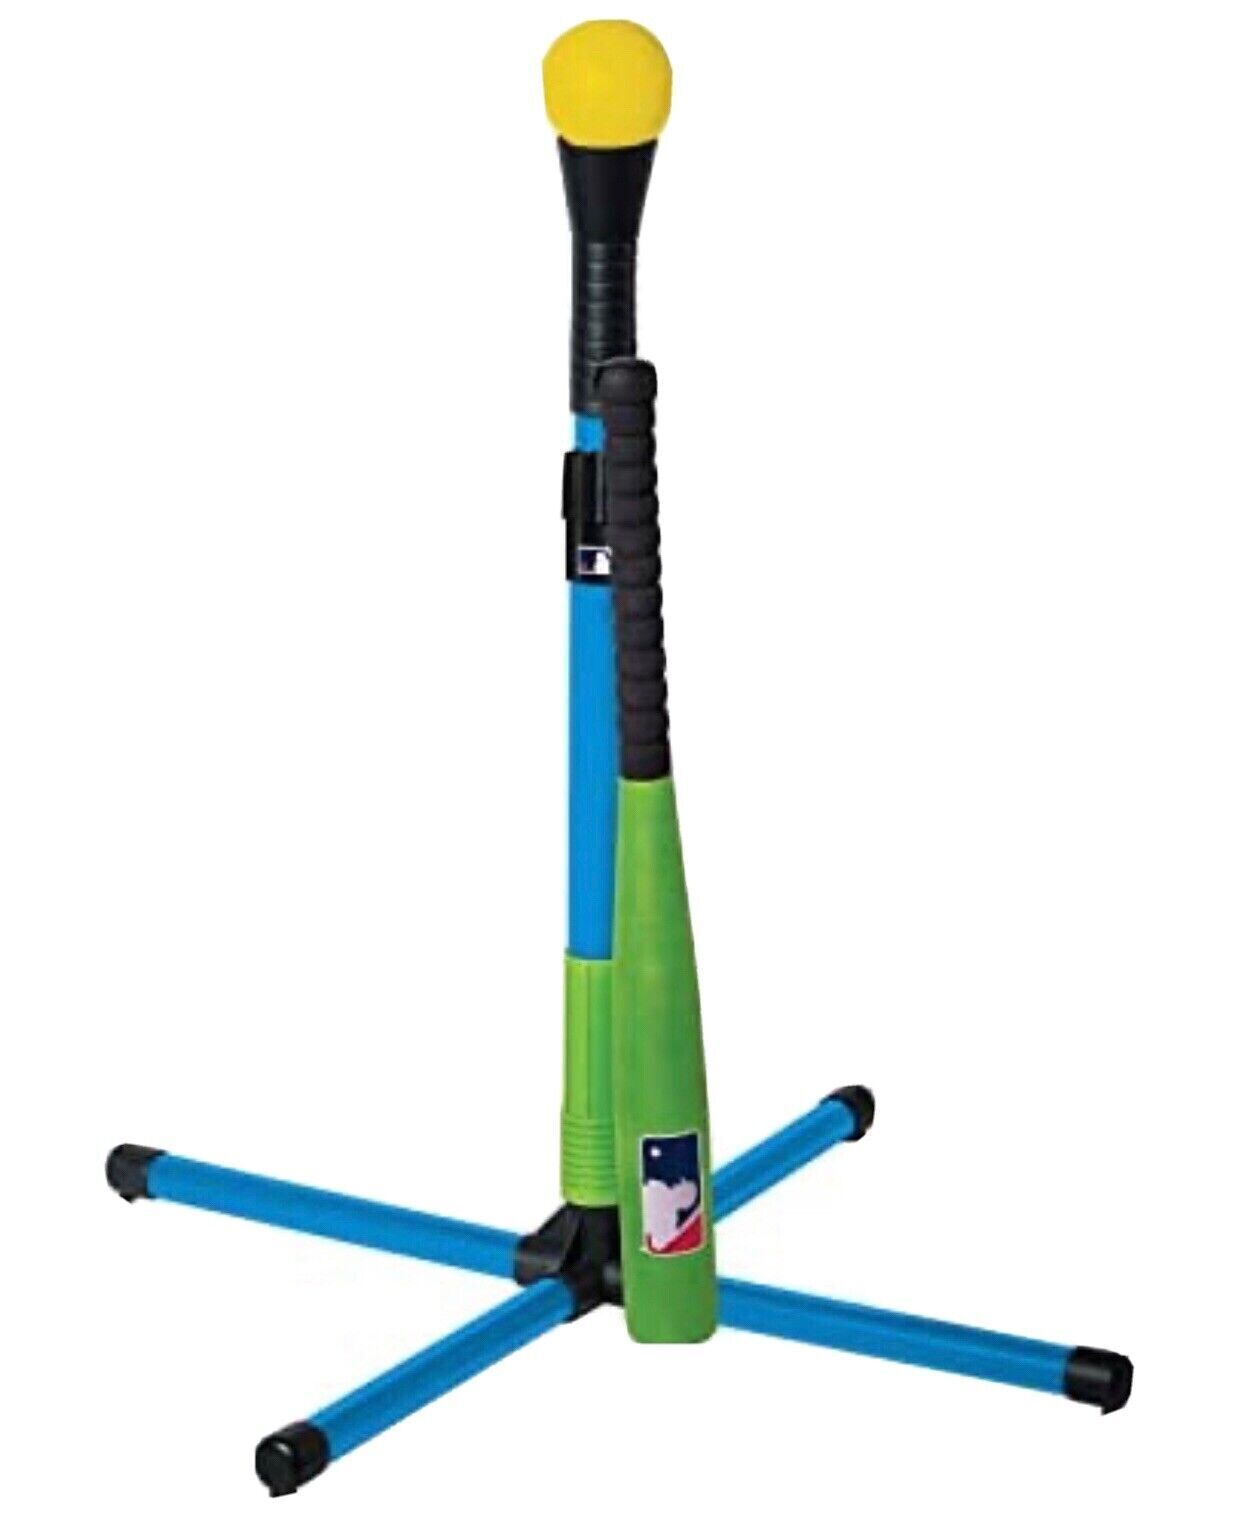 Franklin Xt Batting Tee Multi Height Adjustment For Toddlers Youth New